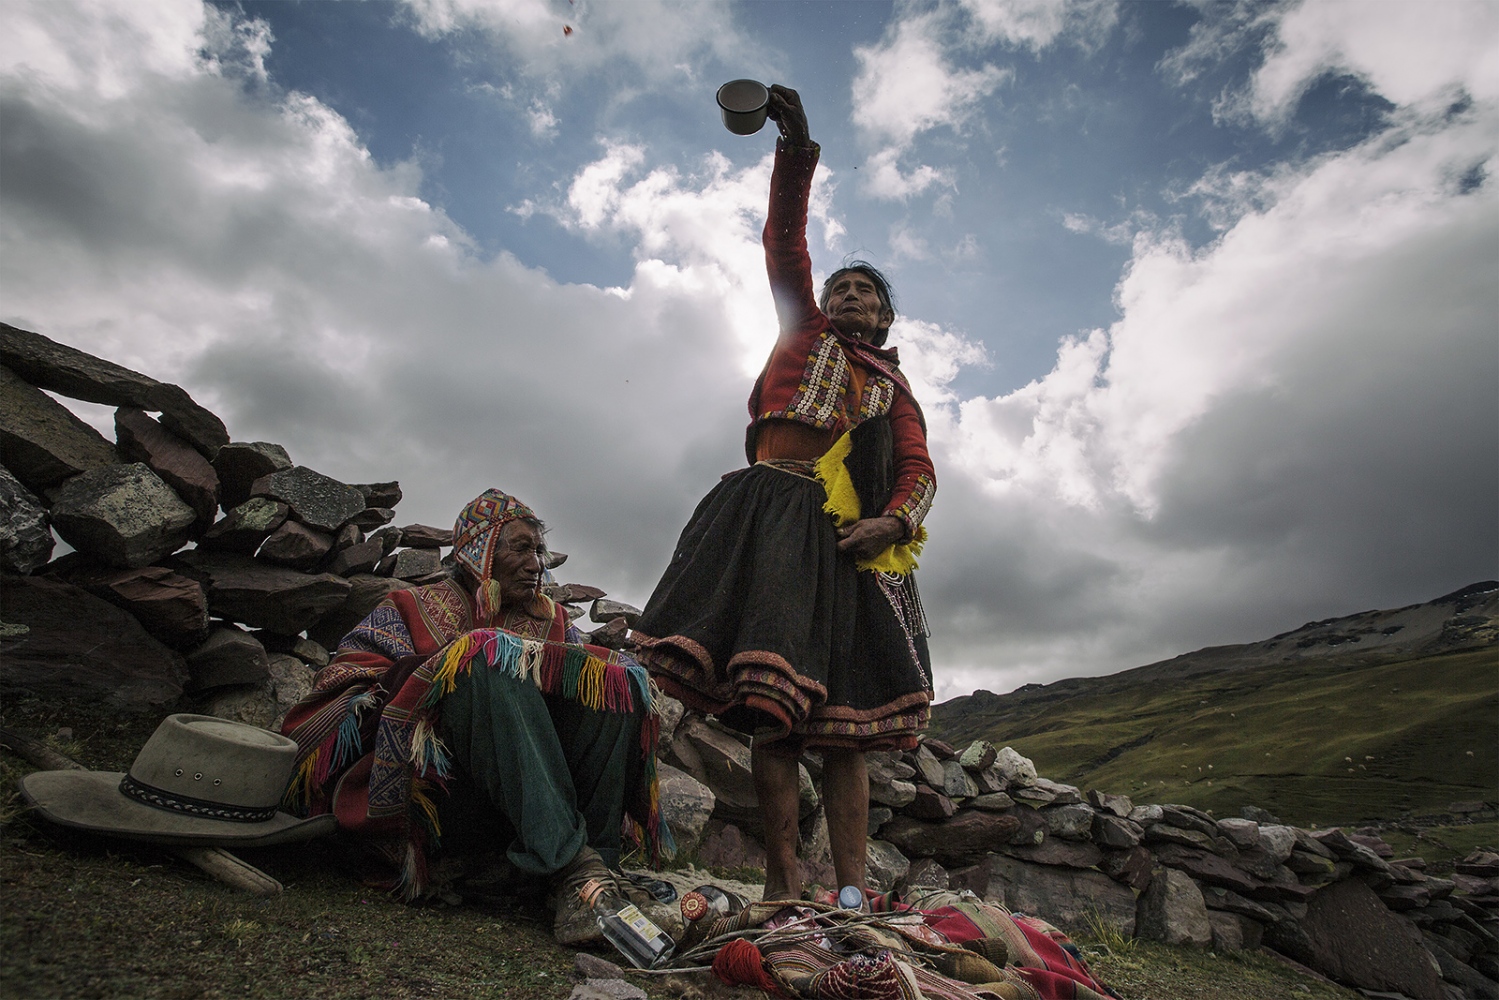 THE SHAMAN ON THE ANDES